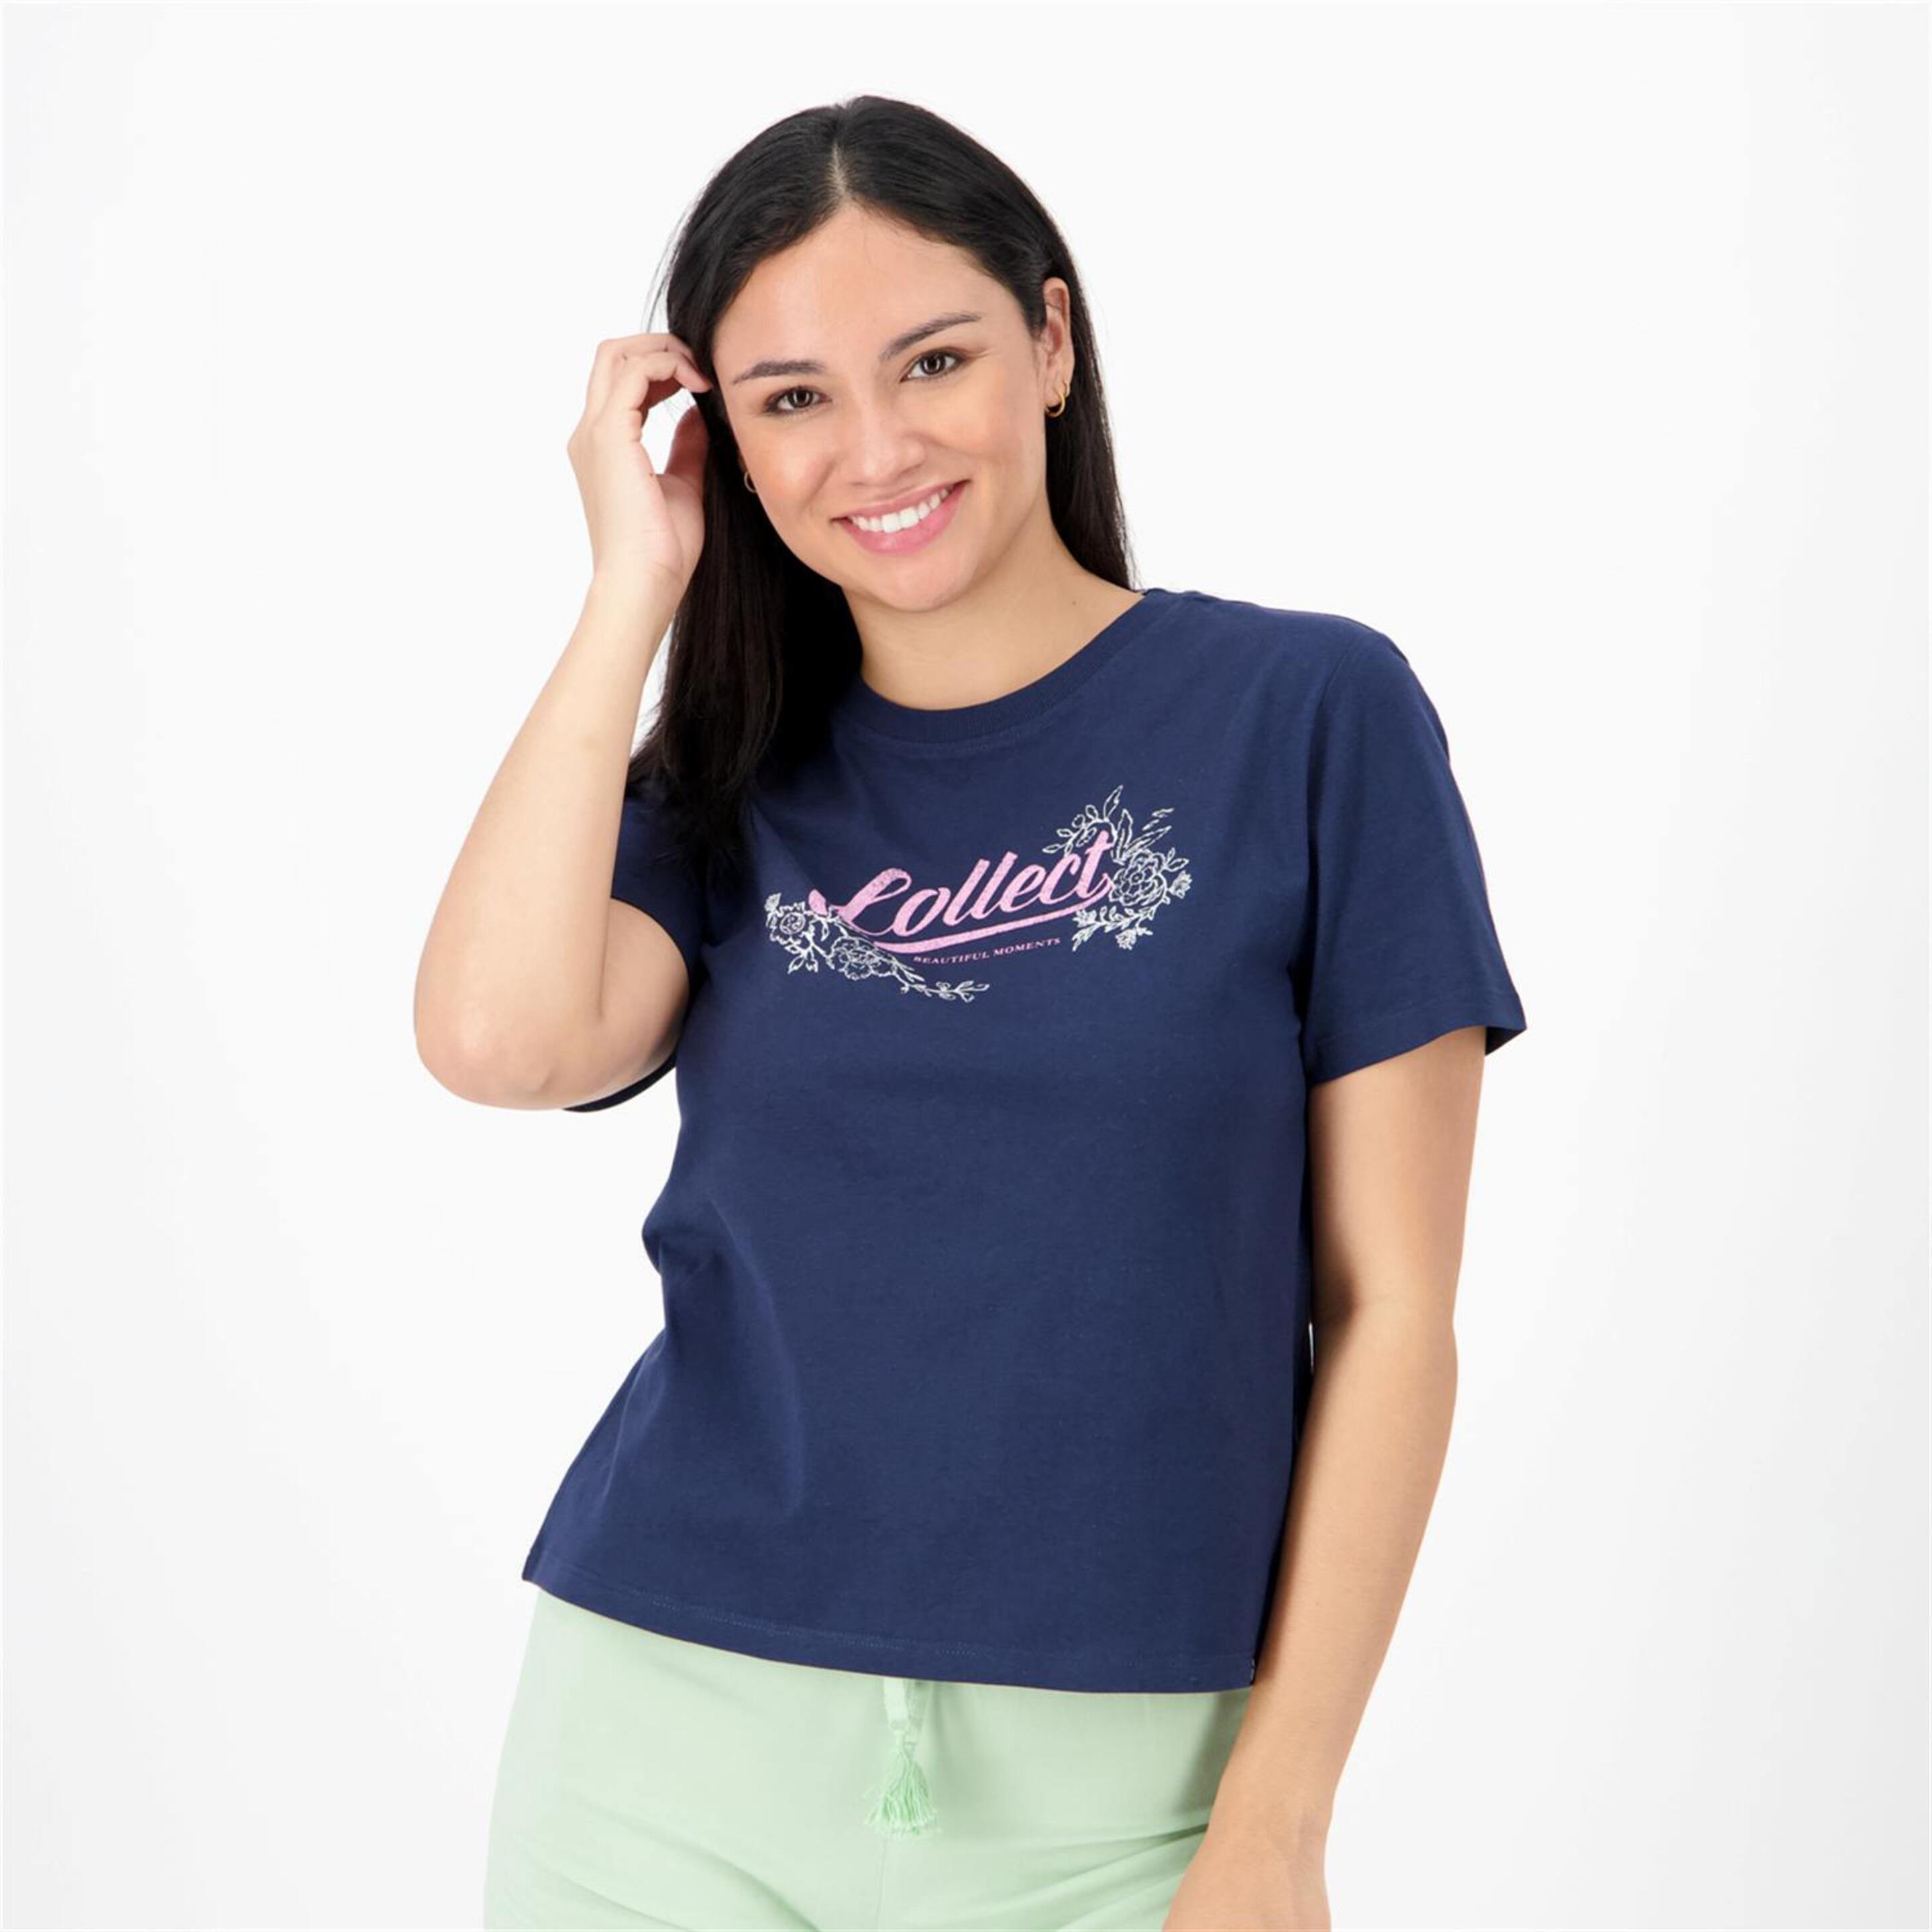 Up Stamps - azul - Camiseta Mujer